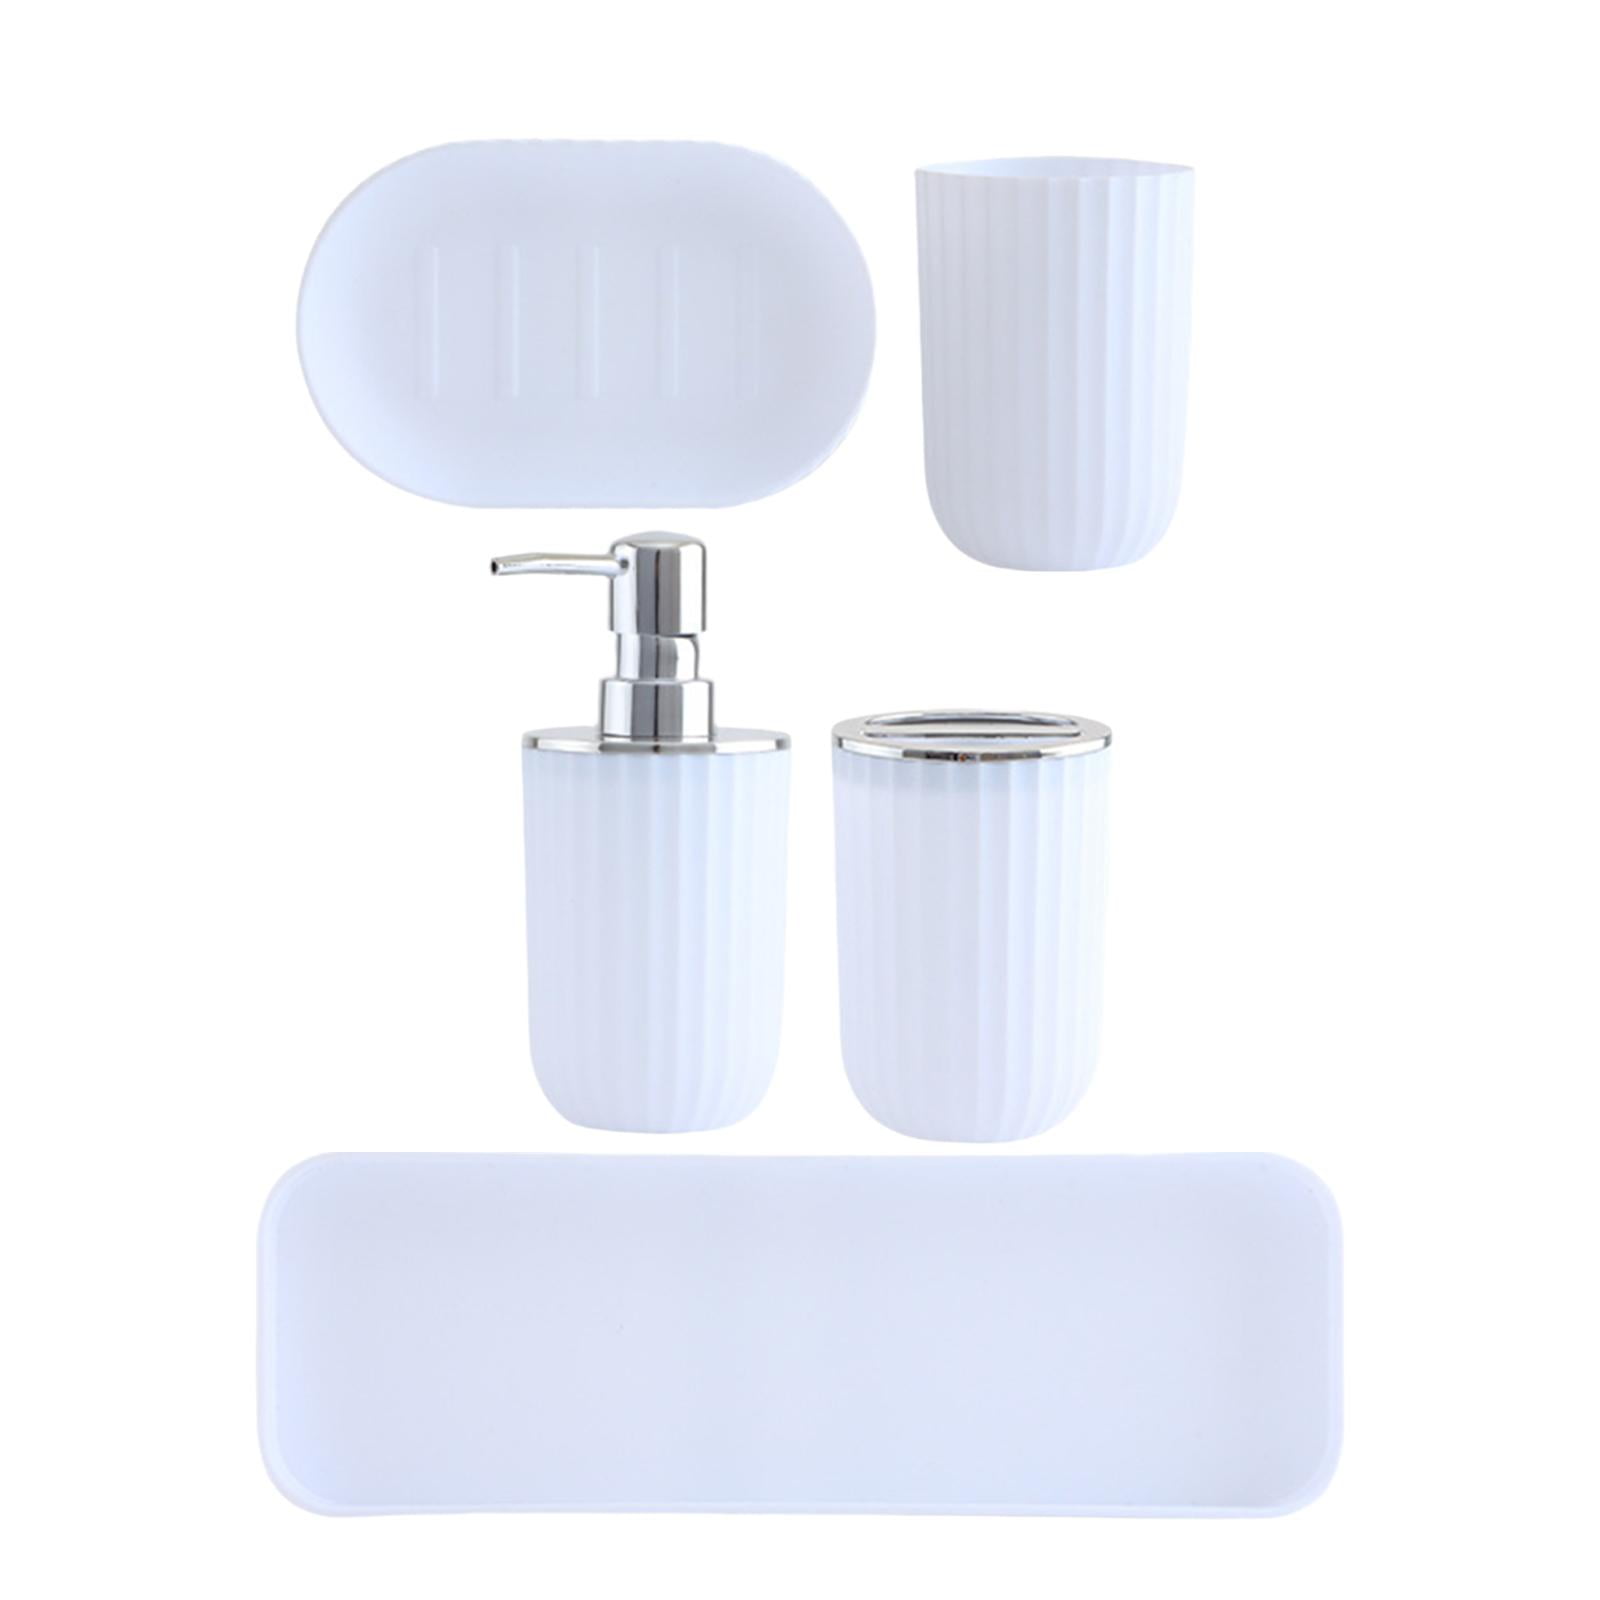 Toothbrush Holders for Bathrooms Wall Mounted, 3 Cups Toothbrush Holder  with Toothpaste Dispenser,Large Capacity Tray, Transparent Drawer, Bathroom